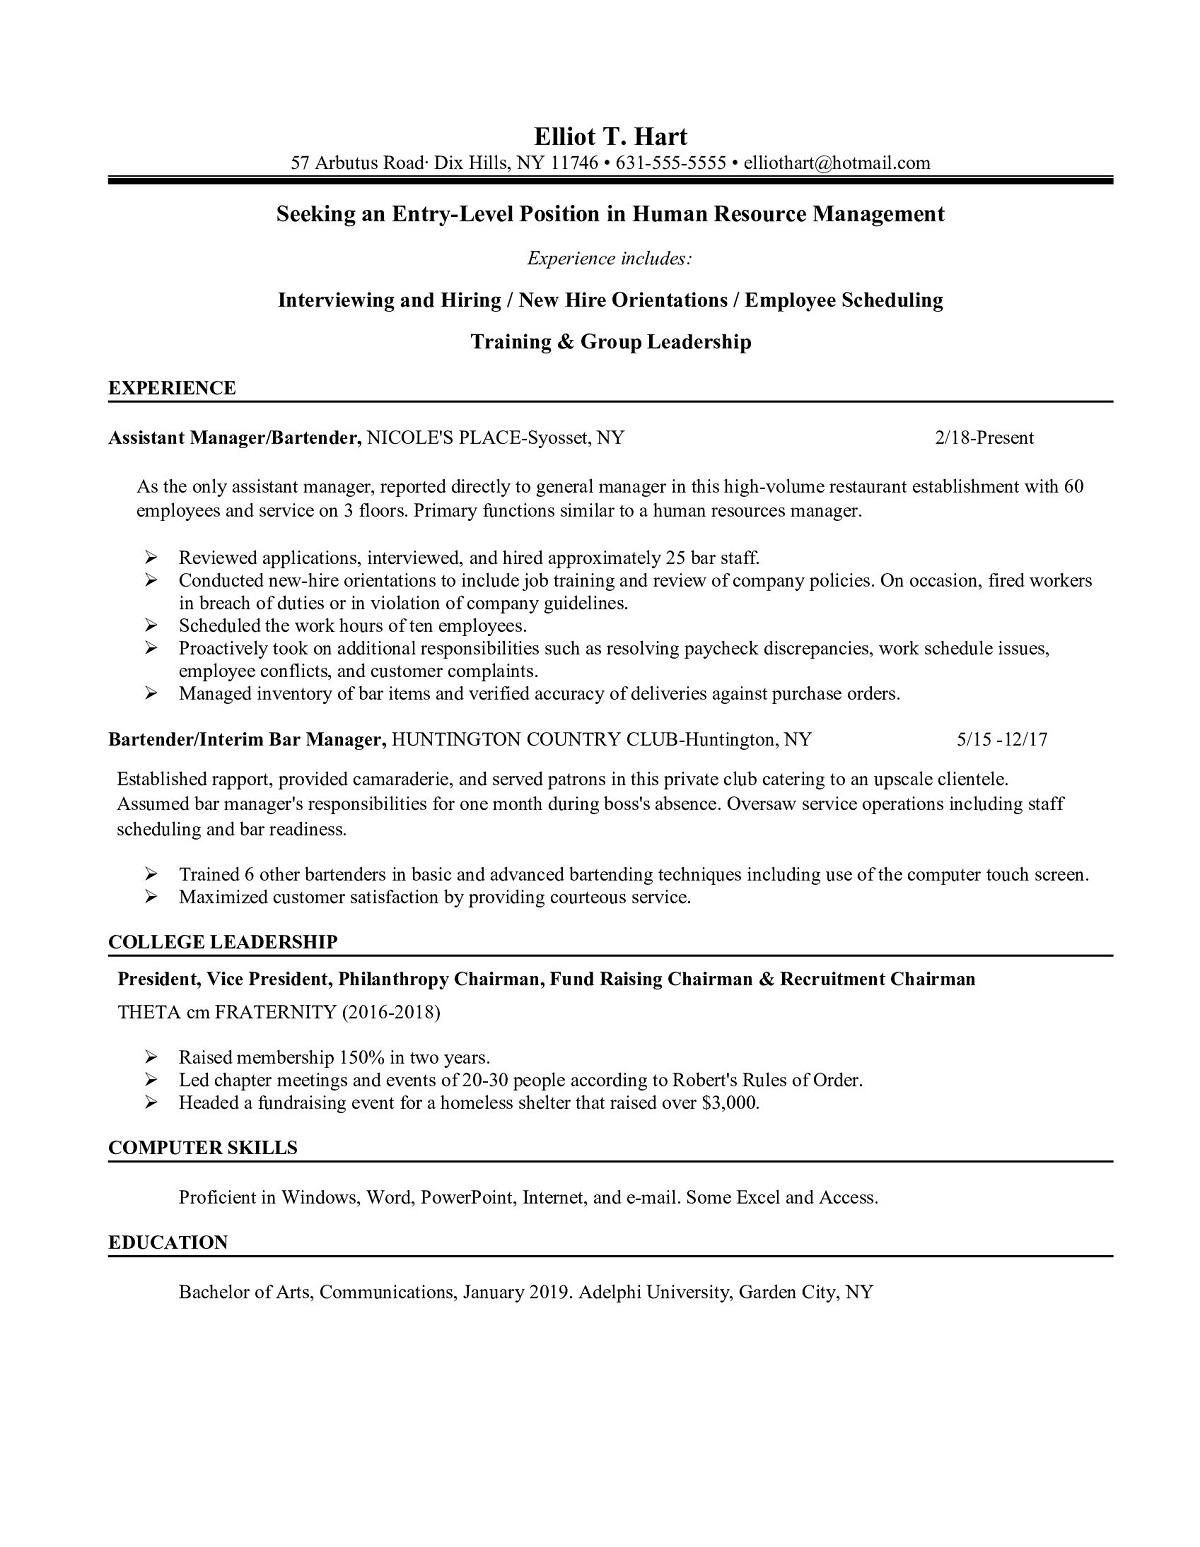 Sample resume: Human Resources, Entry Level, Chronological